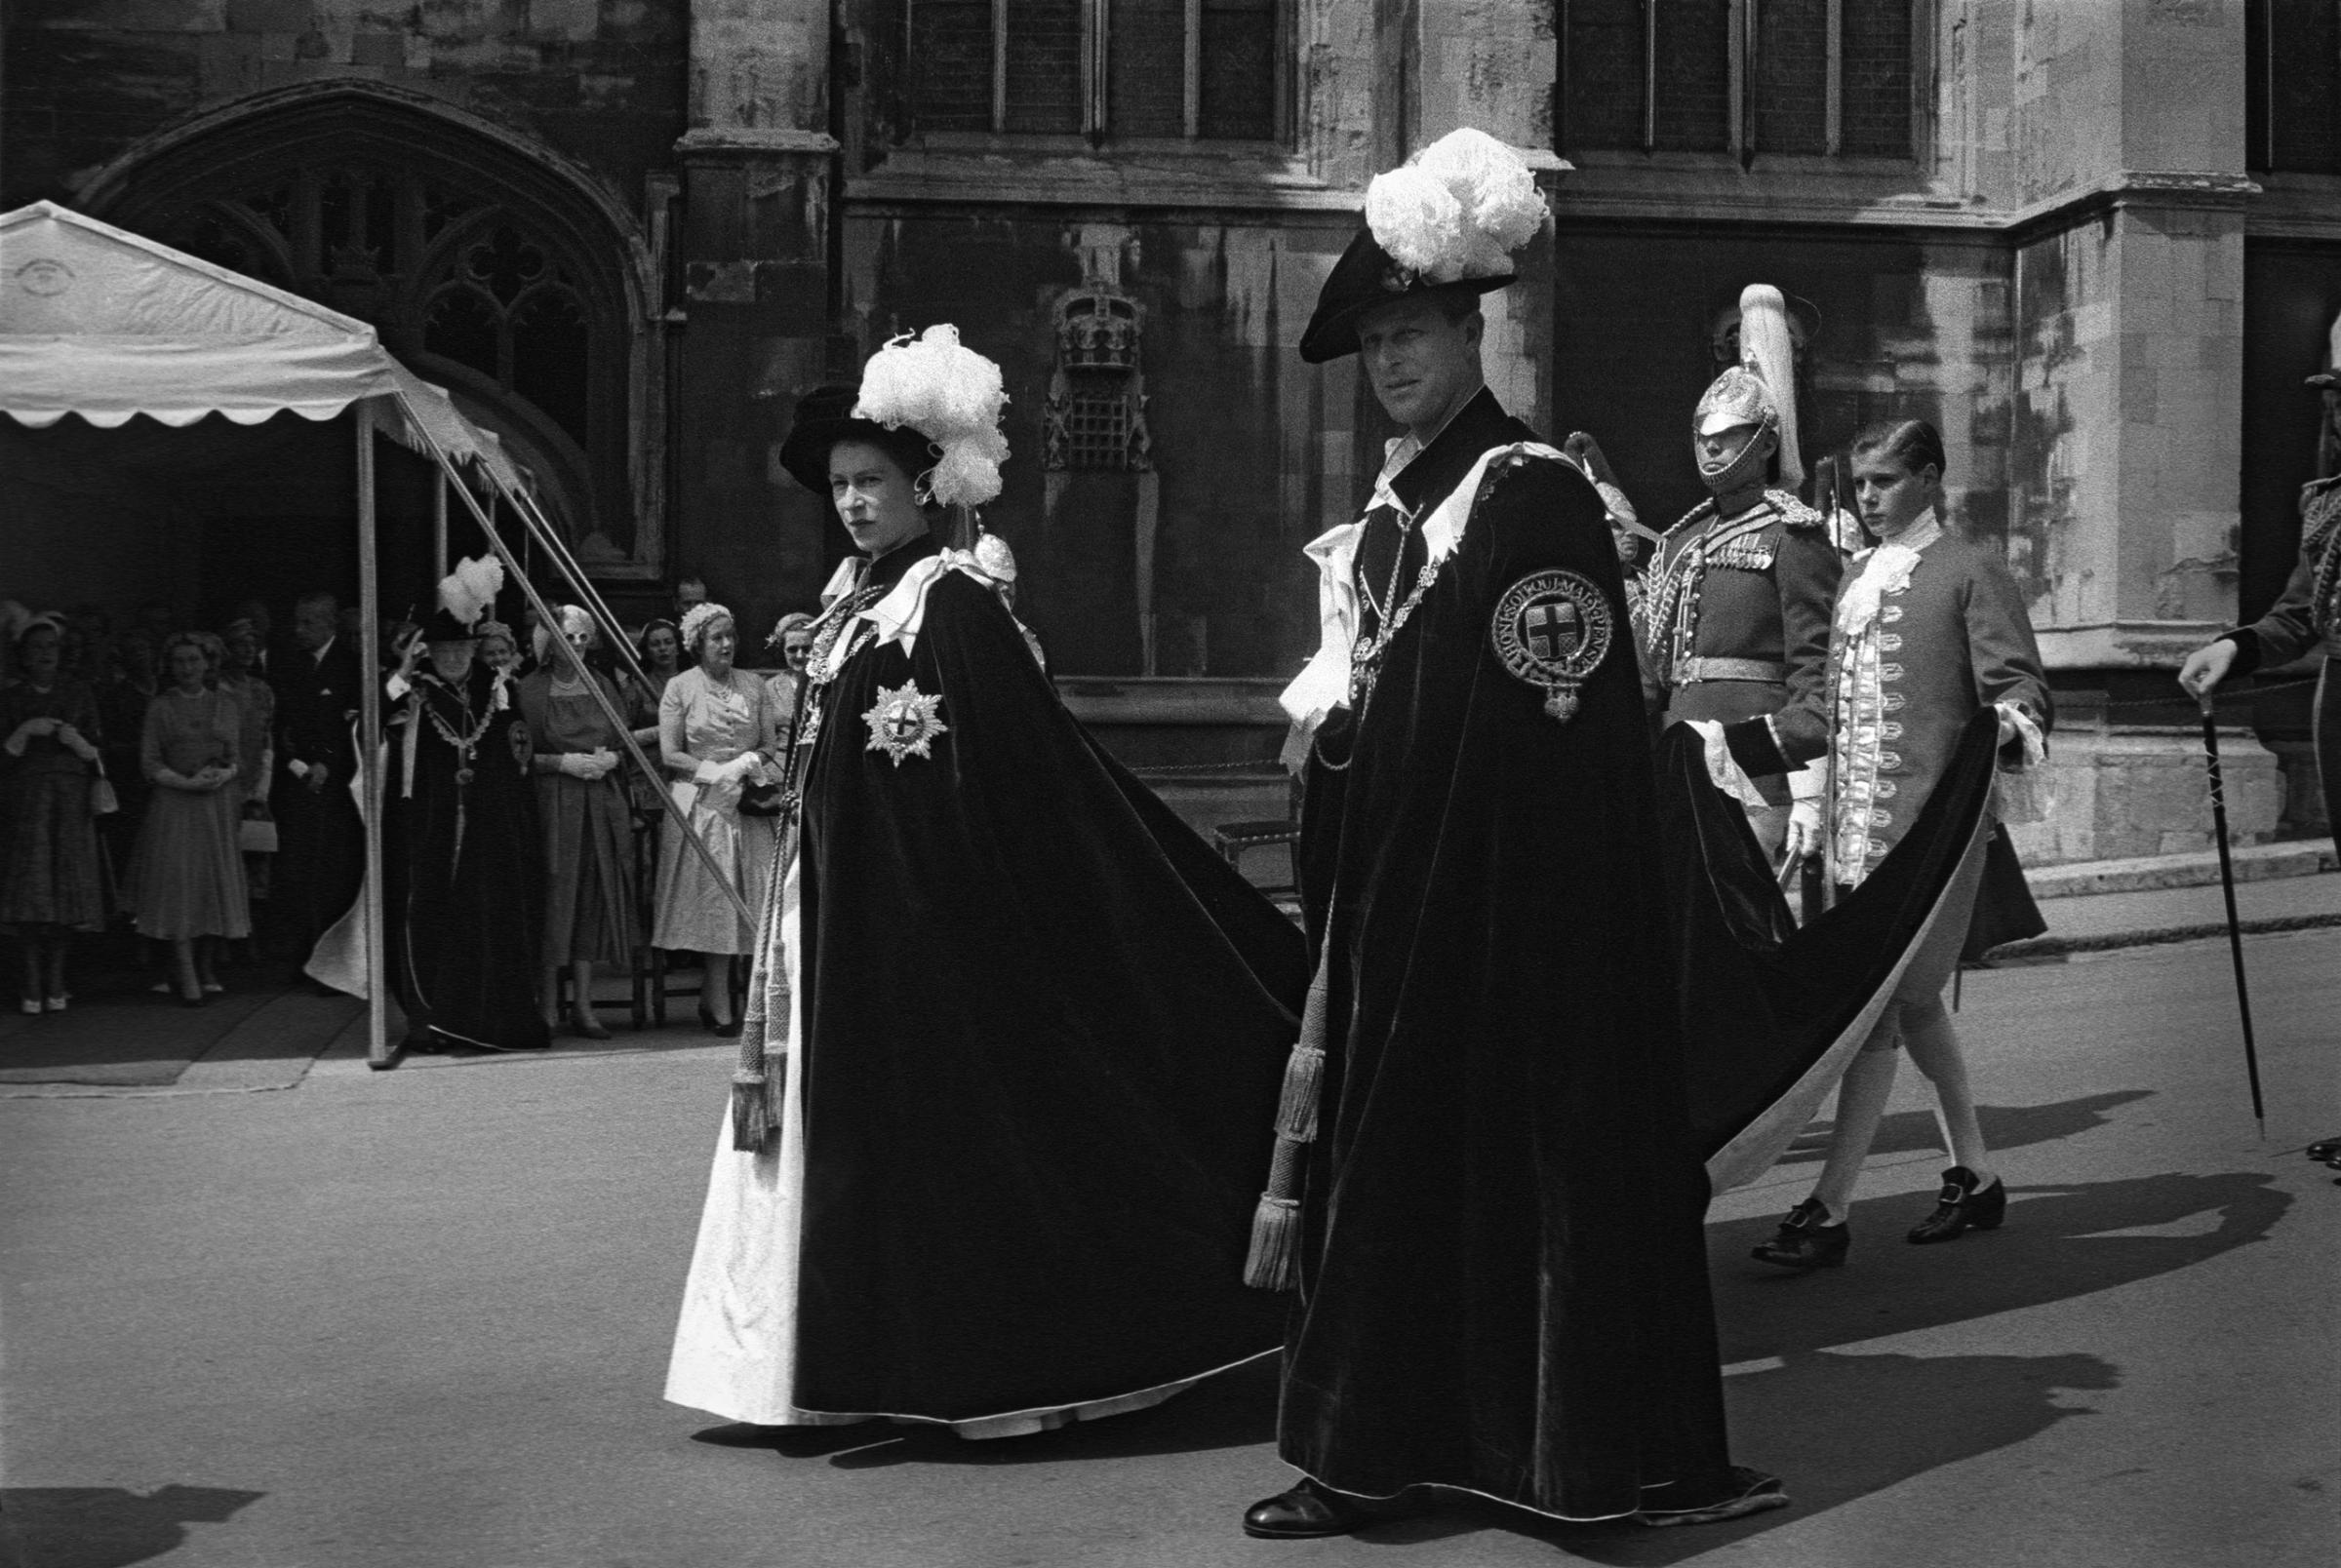 Queen Elizabeth 1 and Prince Philip at the Knight's of the Garter ceremony in June 1953.